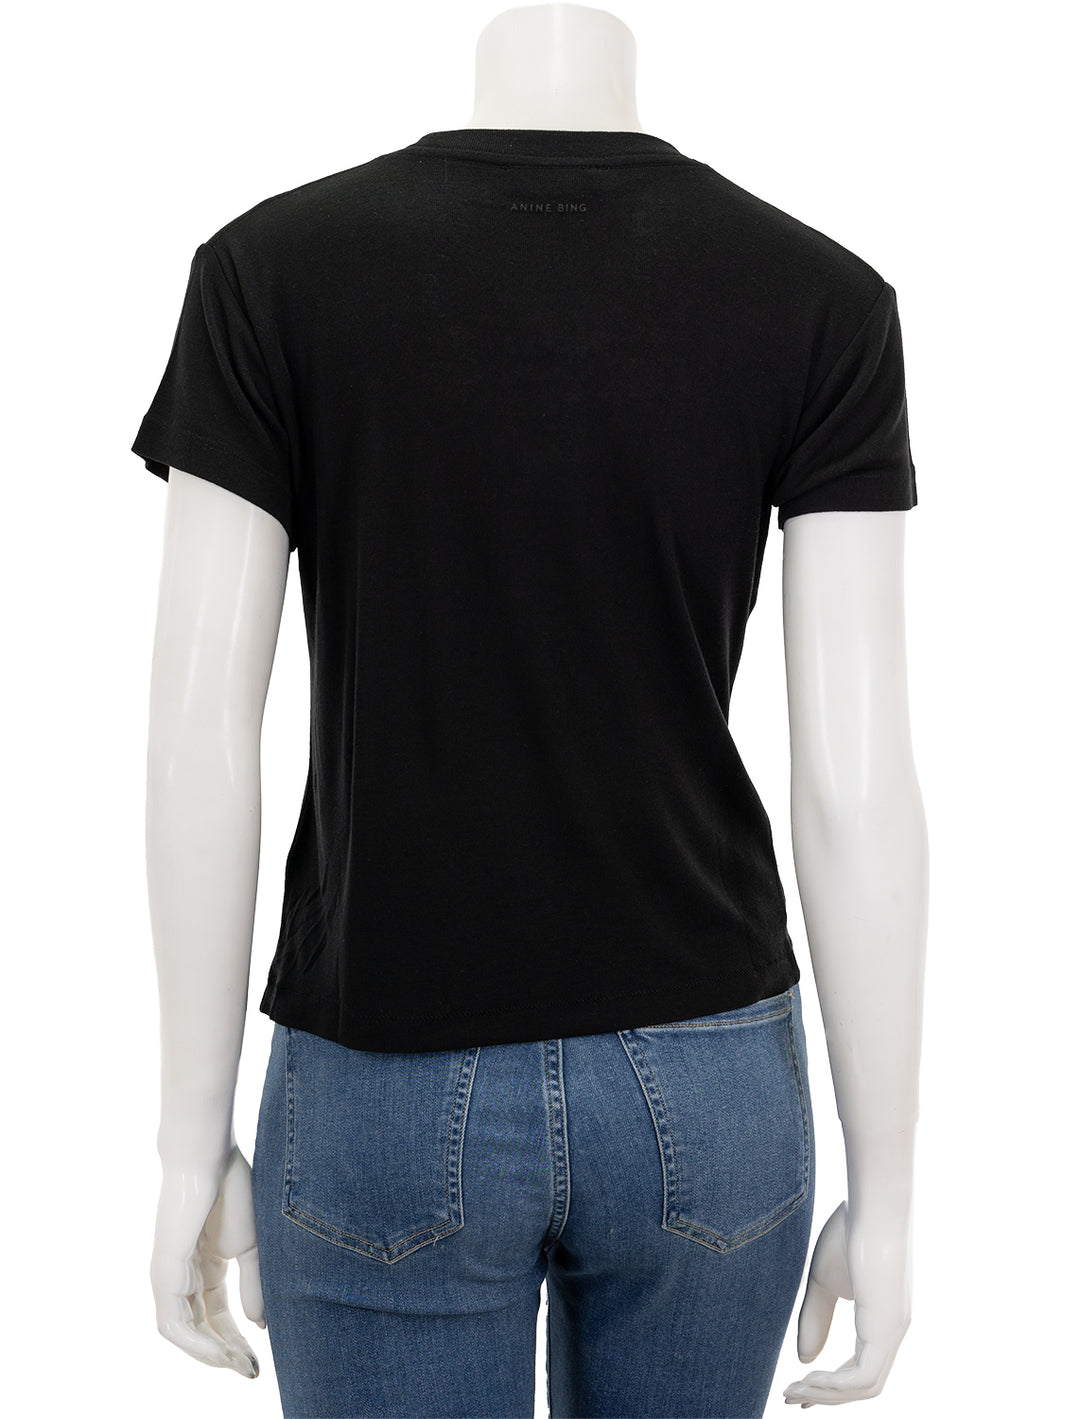 Back view of Anine Bing's amani tee in black.